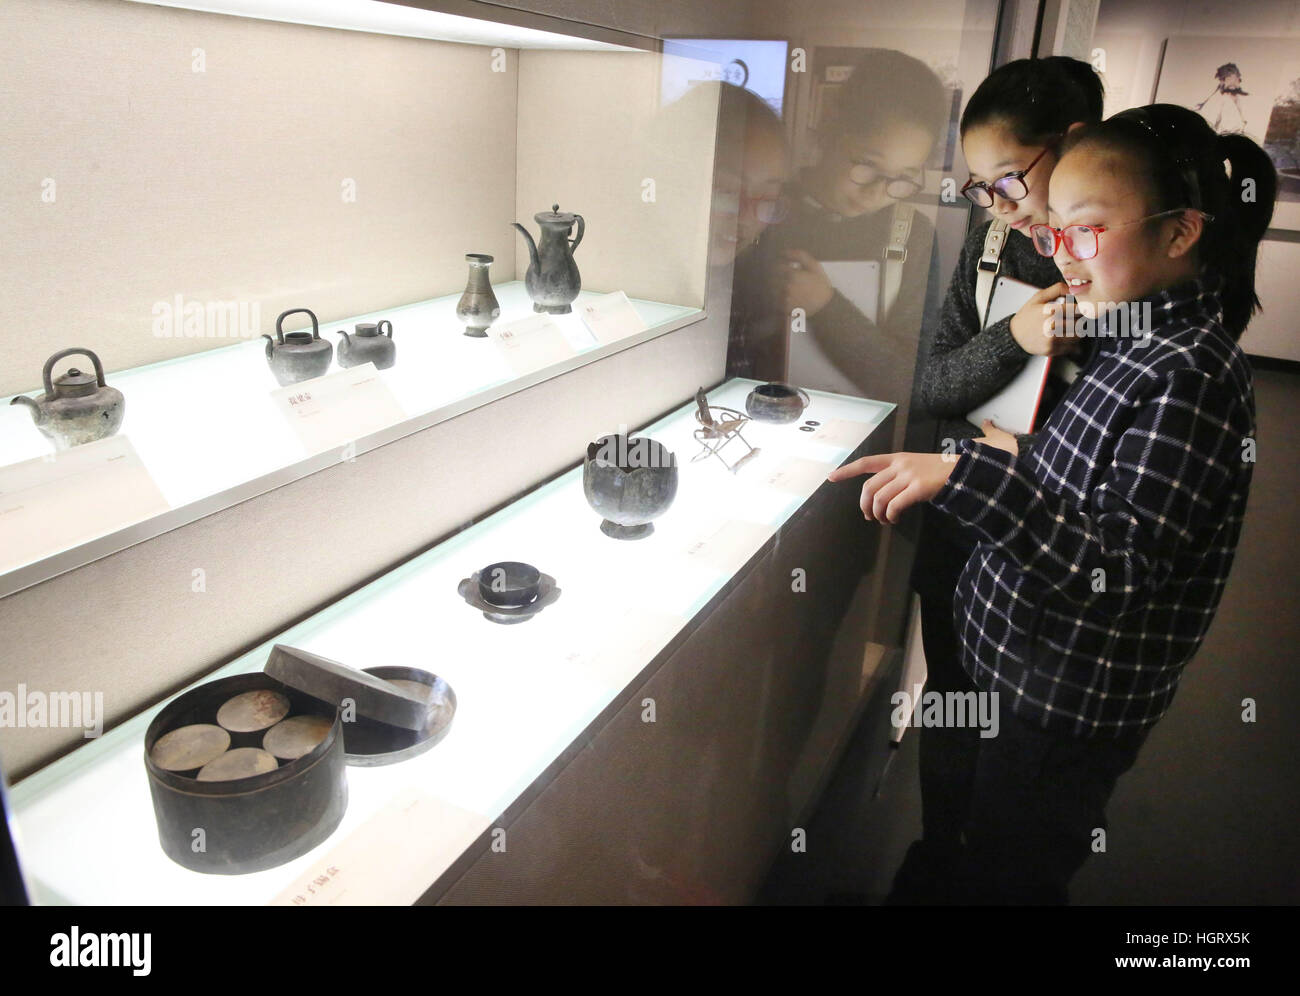 Beijing, China. 12th Jan, 2017. Visitors watch the exhibits during an exhibition of purple clay wares at newly-opened Yixing Museum in Yixing City, east China's Jiangsu Province. The three-month exhibition brought Yixing purple clay wares, which were collected by Beijing's Palace Museum, to their producing place Yixing. The new Yixing Museum with an area of 25,000 square meters opened on Thursday. © Ding Huanxin/Xinhua/Alamy Live News Stock Photo